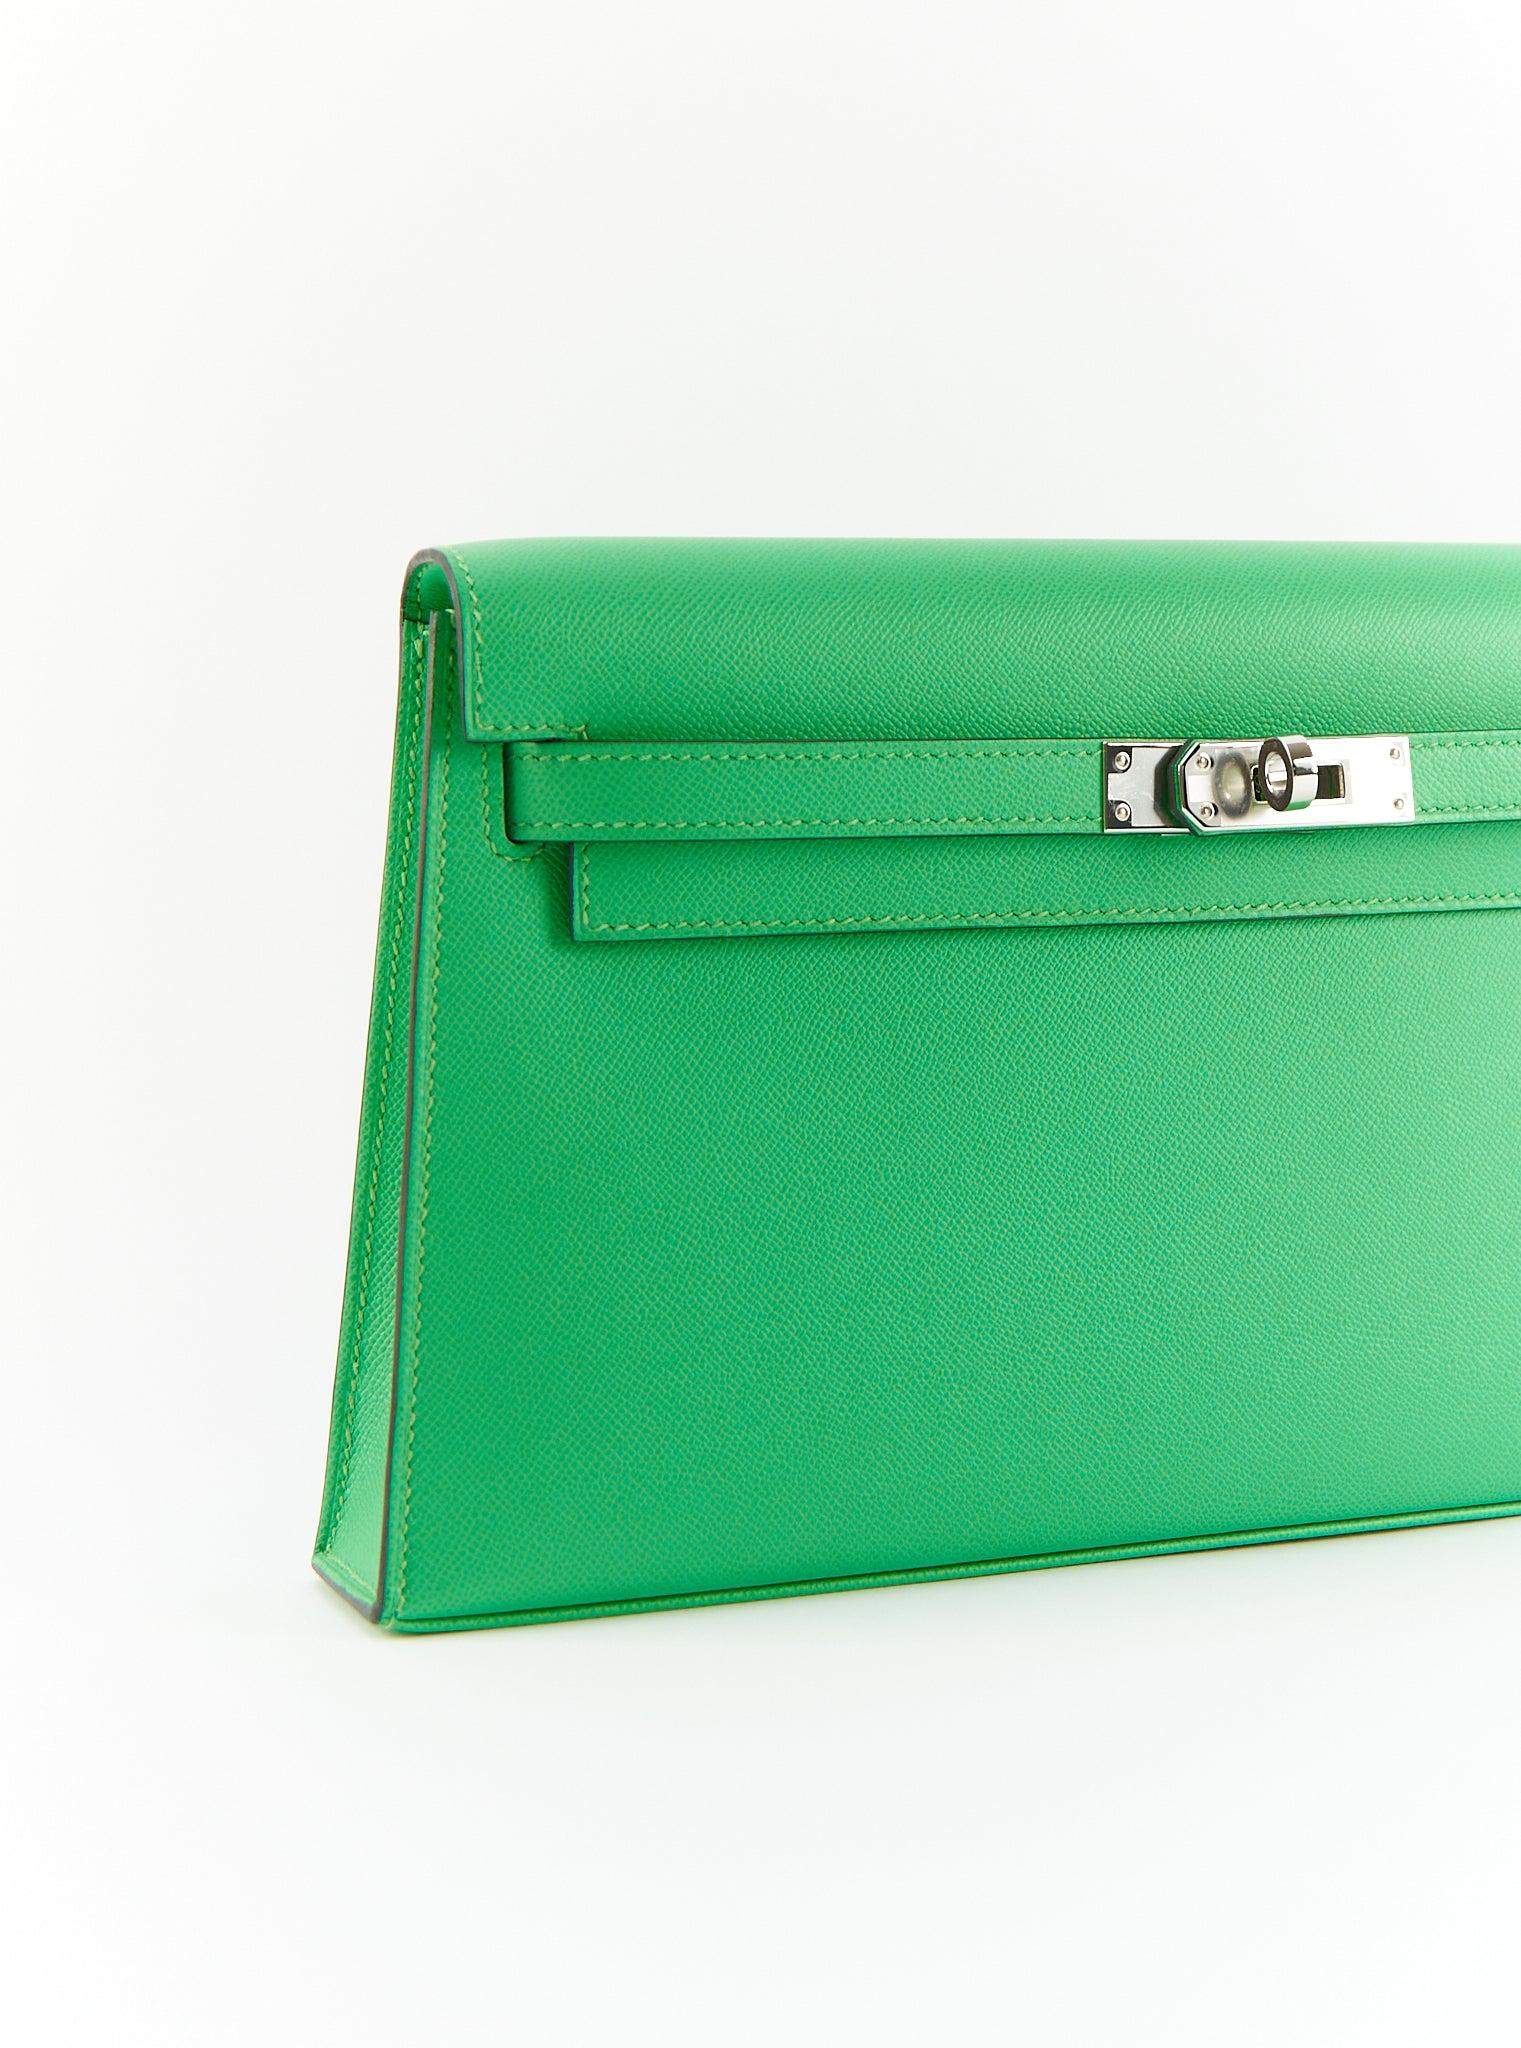 HERMÈS KELLY ELAN VERT COMIC Madame Leather with Palladium Hardware In Excellent Condition For Sale In London, GB